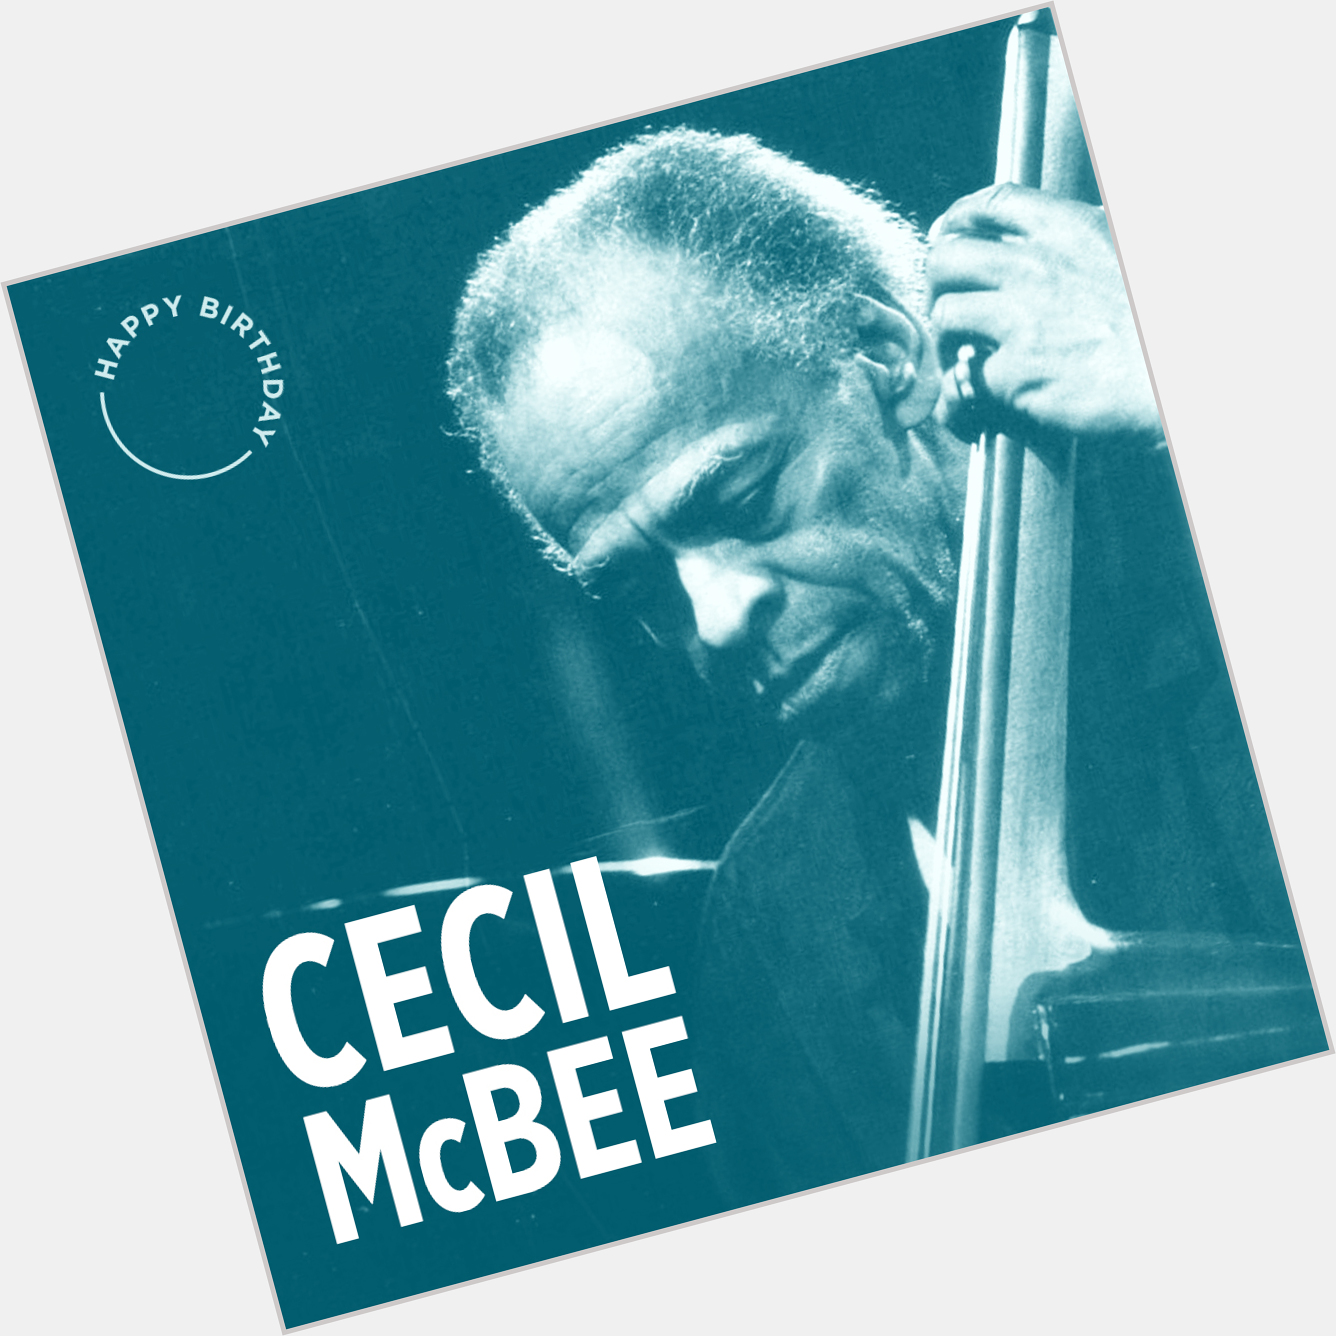 Wishing a very Happy Birthday to bassist, composer, and educator Cecil McBee, who turns 87 today! 